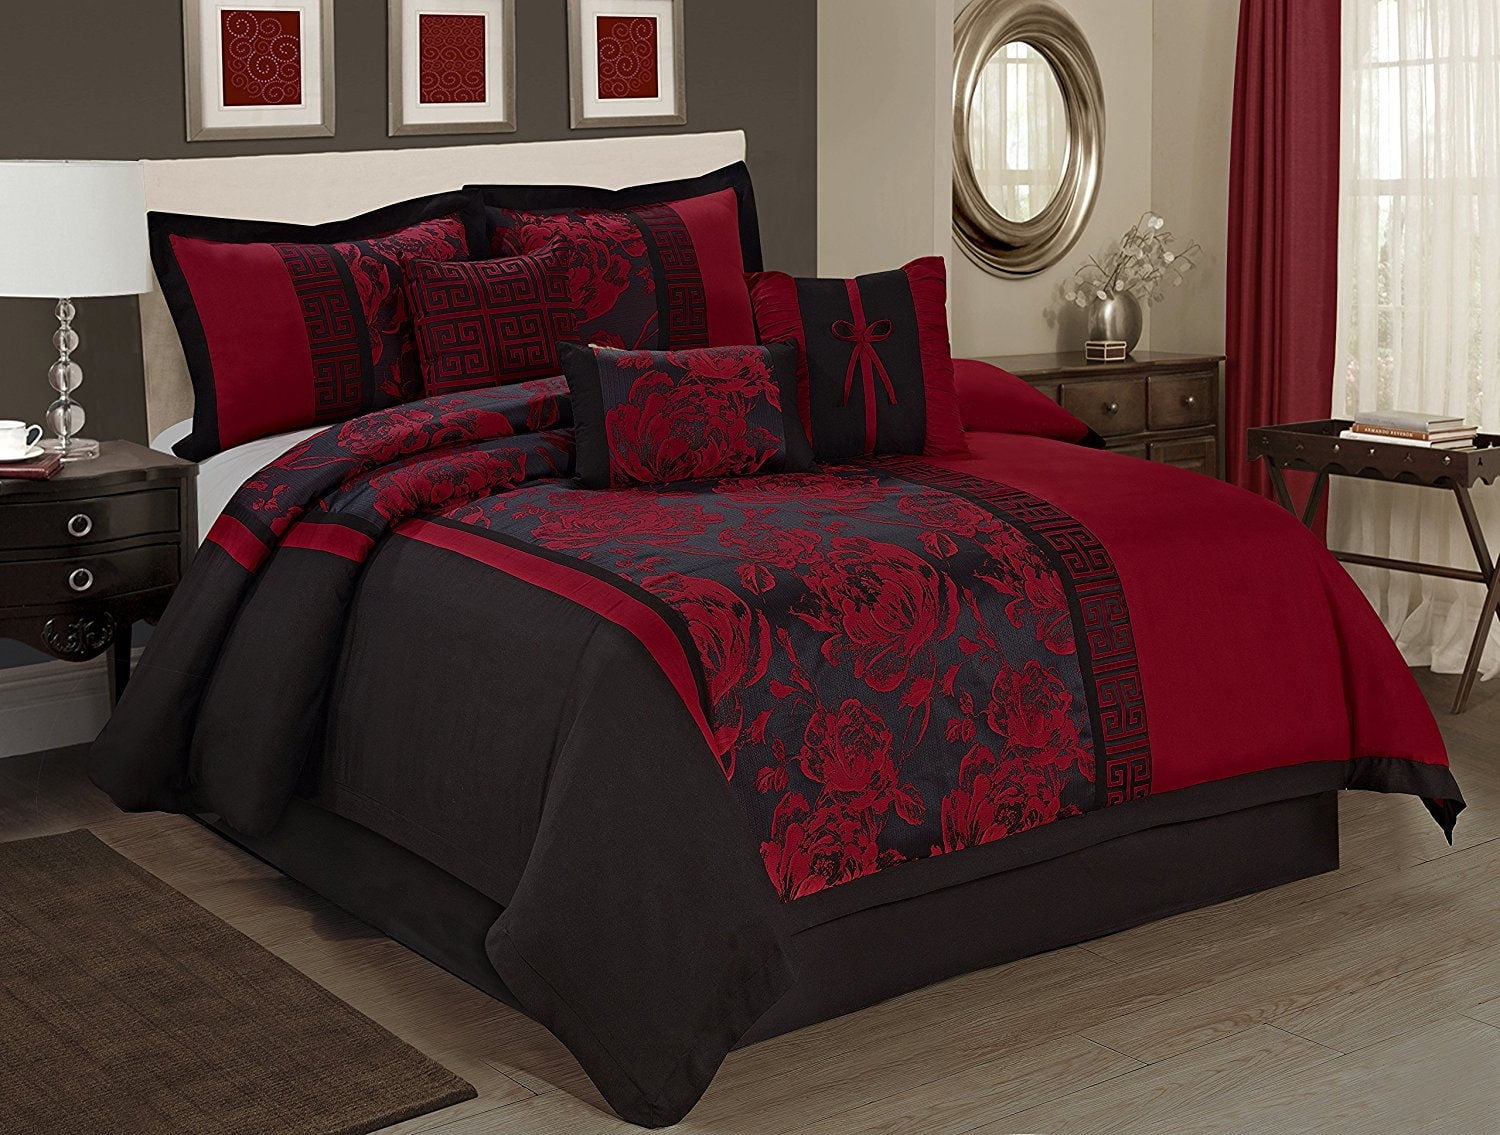 7 Piece Peony Jacquard Fabric Patchwork Clearance bedding Comforter Set Fade Resistant, Wrinkle Free, No Ironing Necessary, Super Soft, All Size Queen King CalKing Size (Queen, Burgundy)